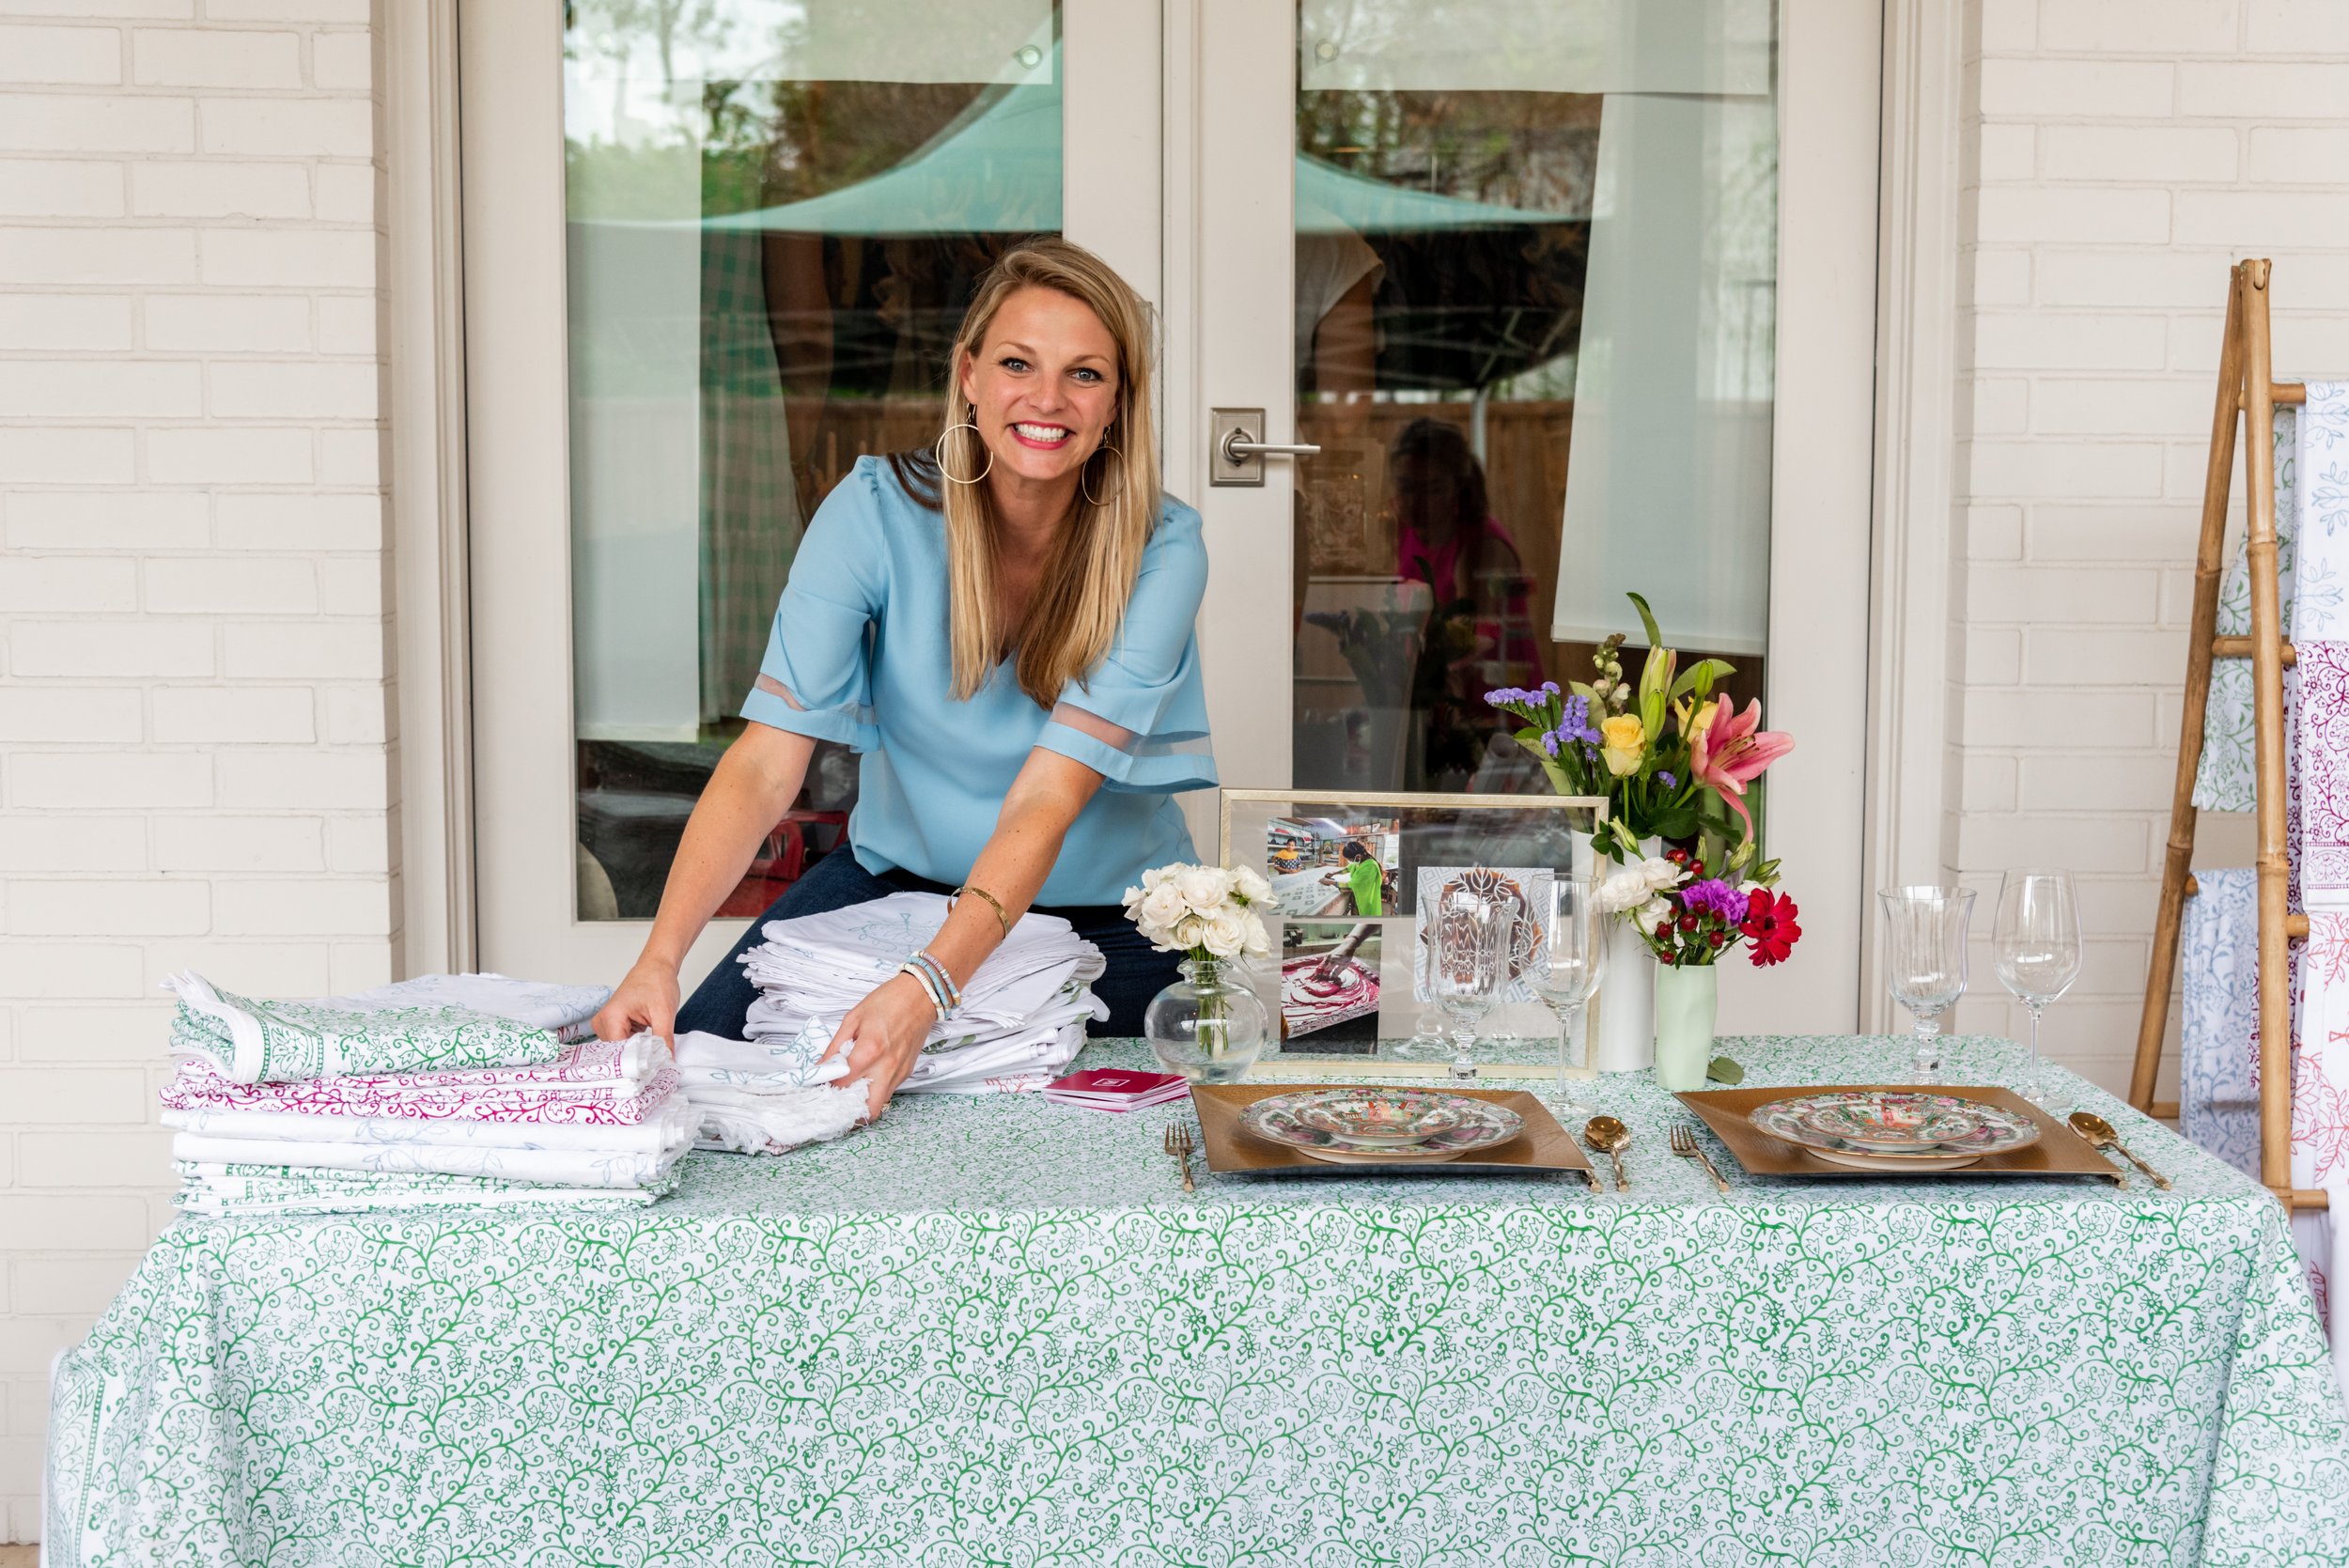 Bring The Beauty Of Block Printing To Your Table* – The Mended Company